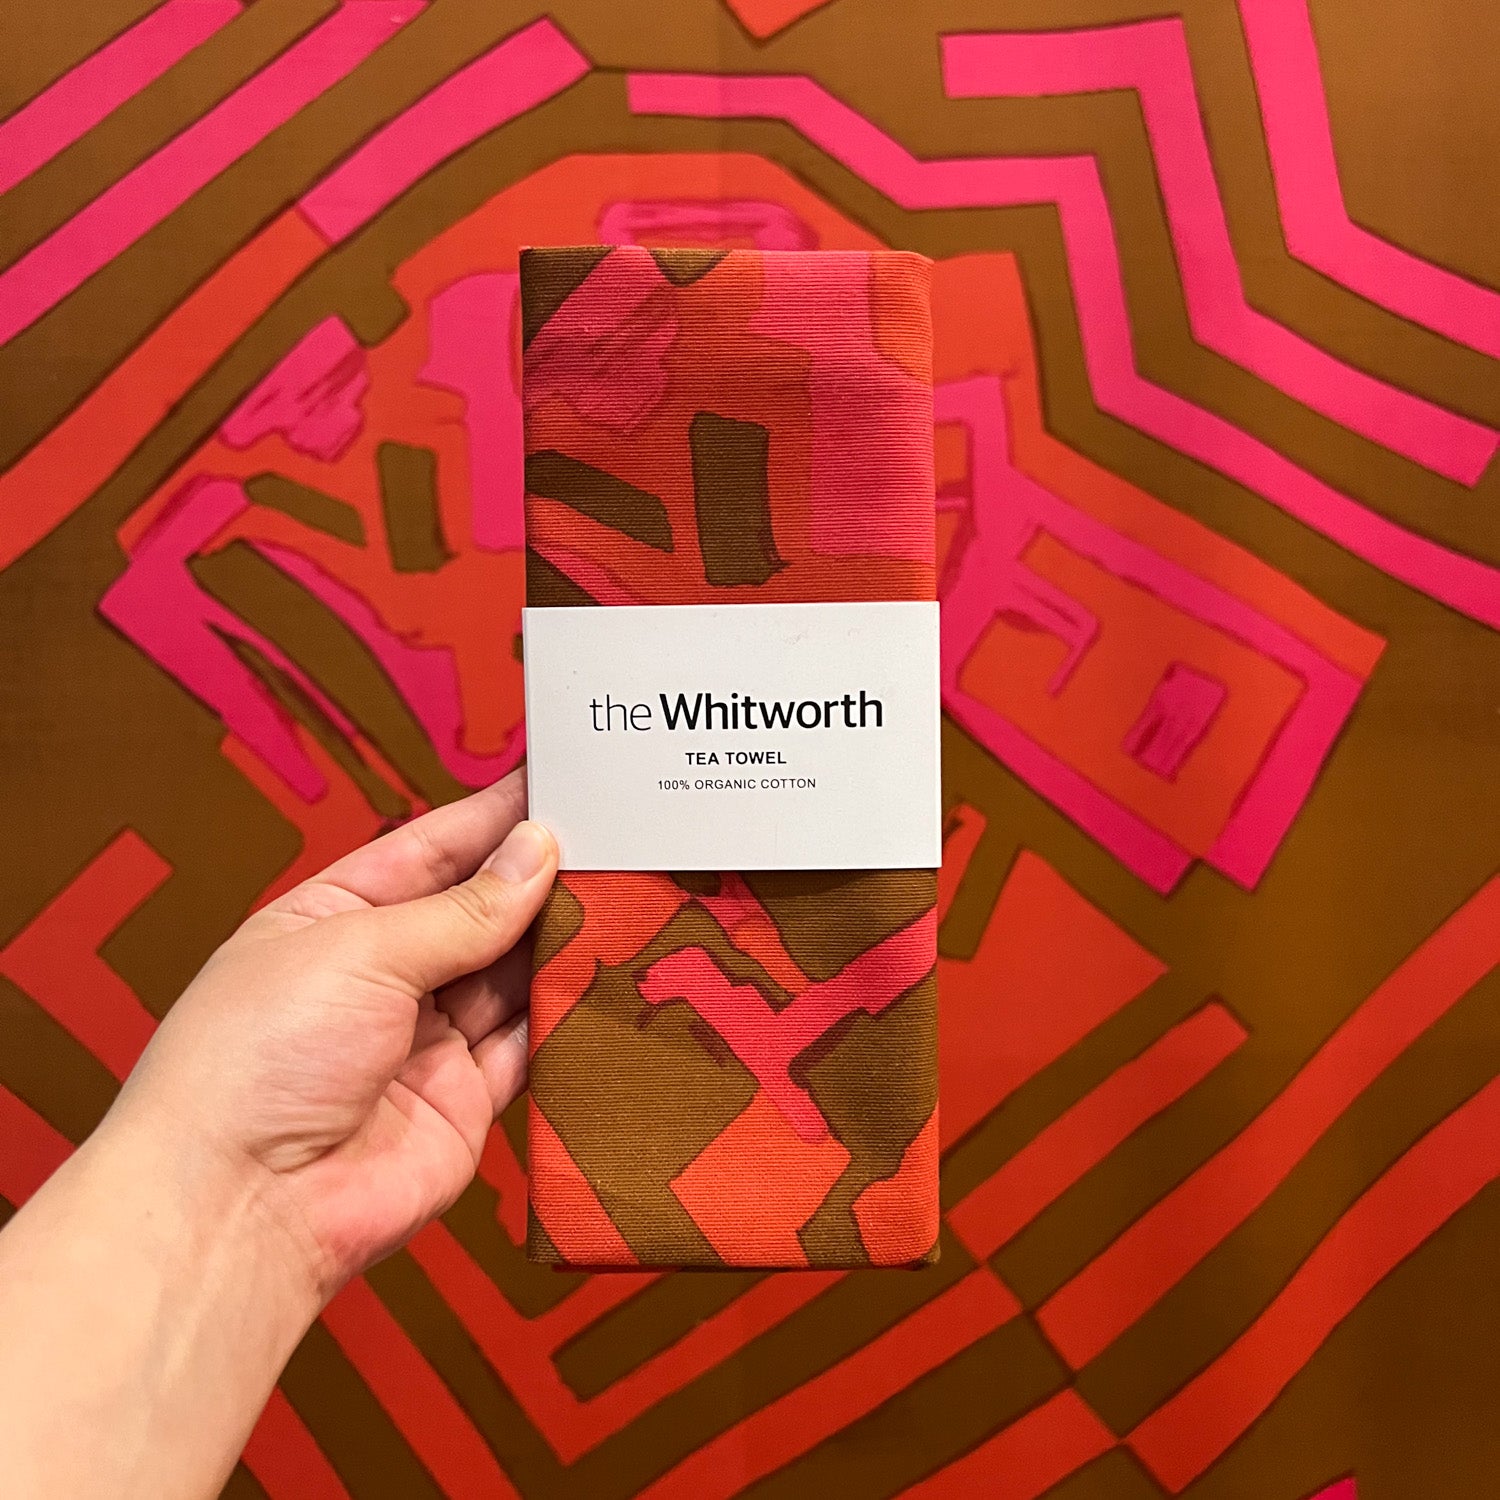 A person holding a tea towel featuring Shirley Craven's sixty three design, in front of the textile design in the Whitworth's exhibition space. The tea towel has a white belly band wrapped around it with the Whitworth's logo.